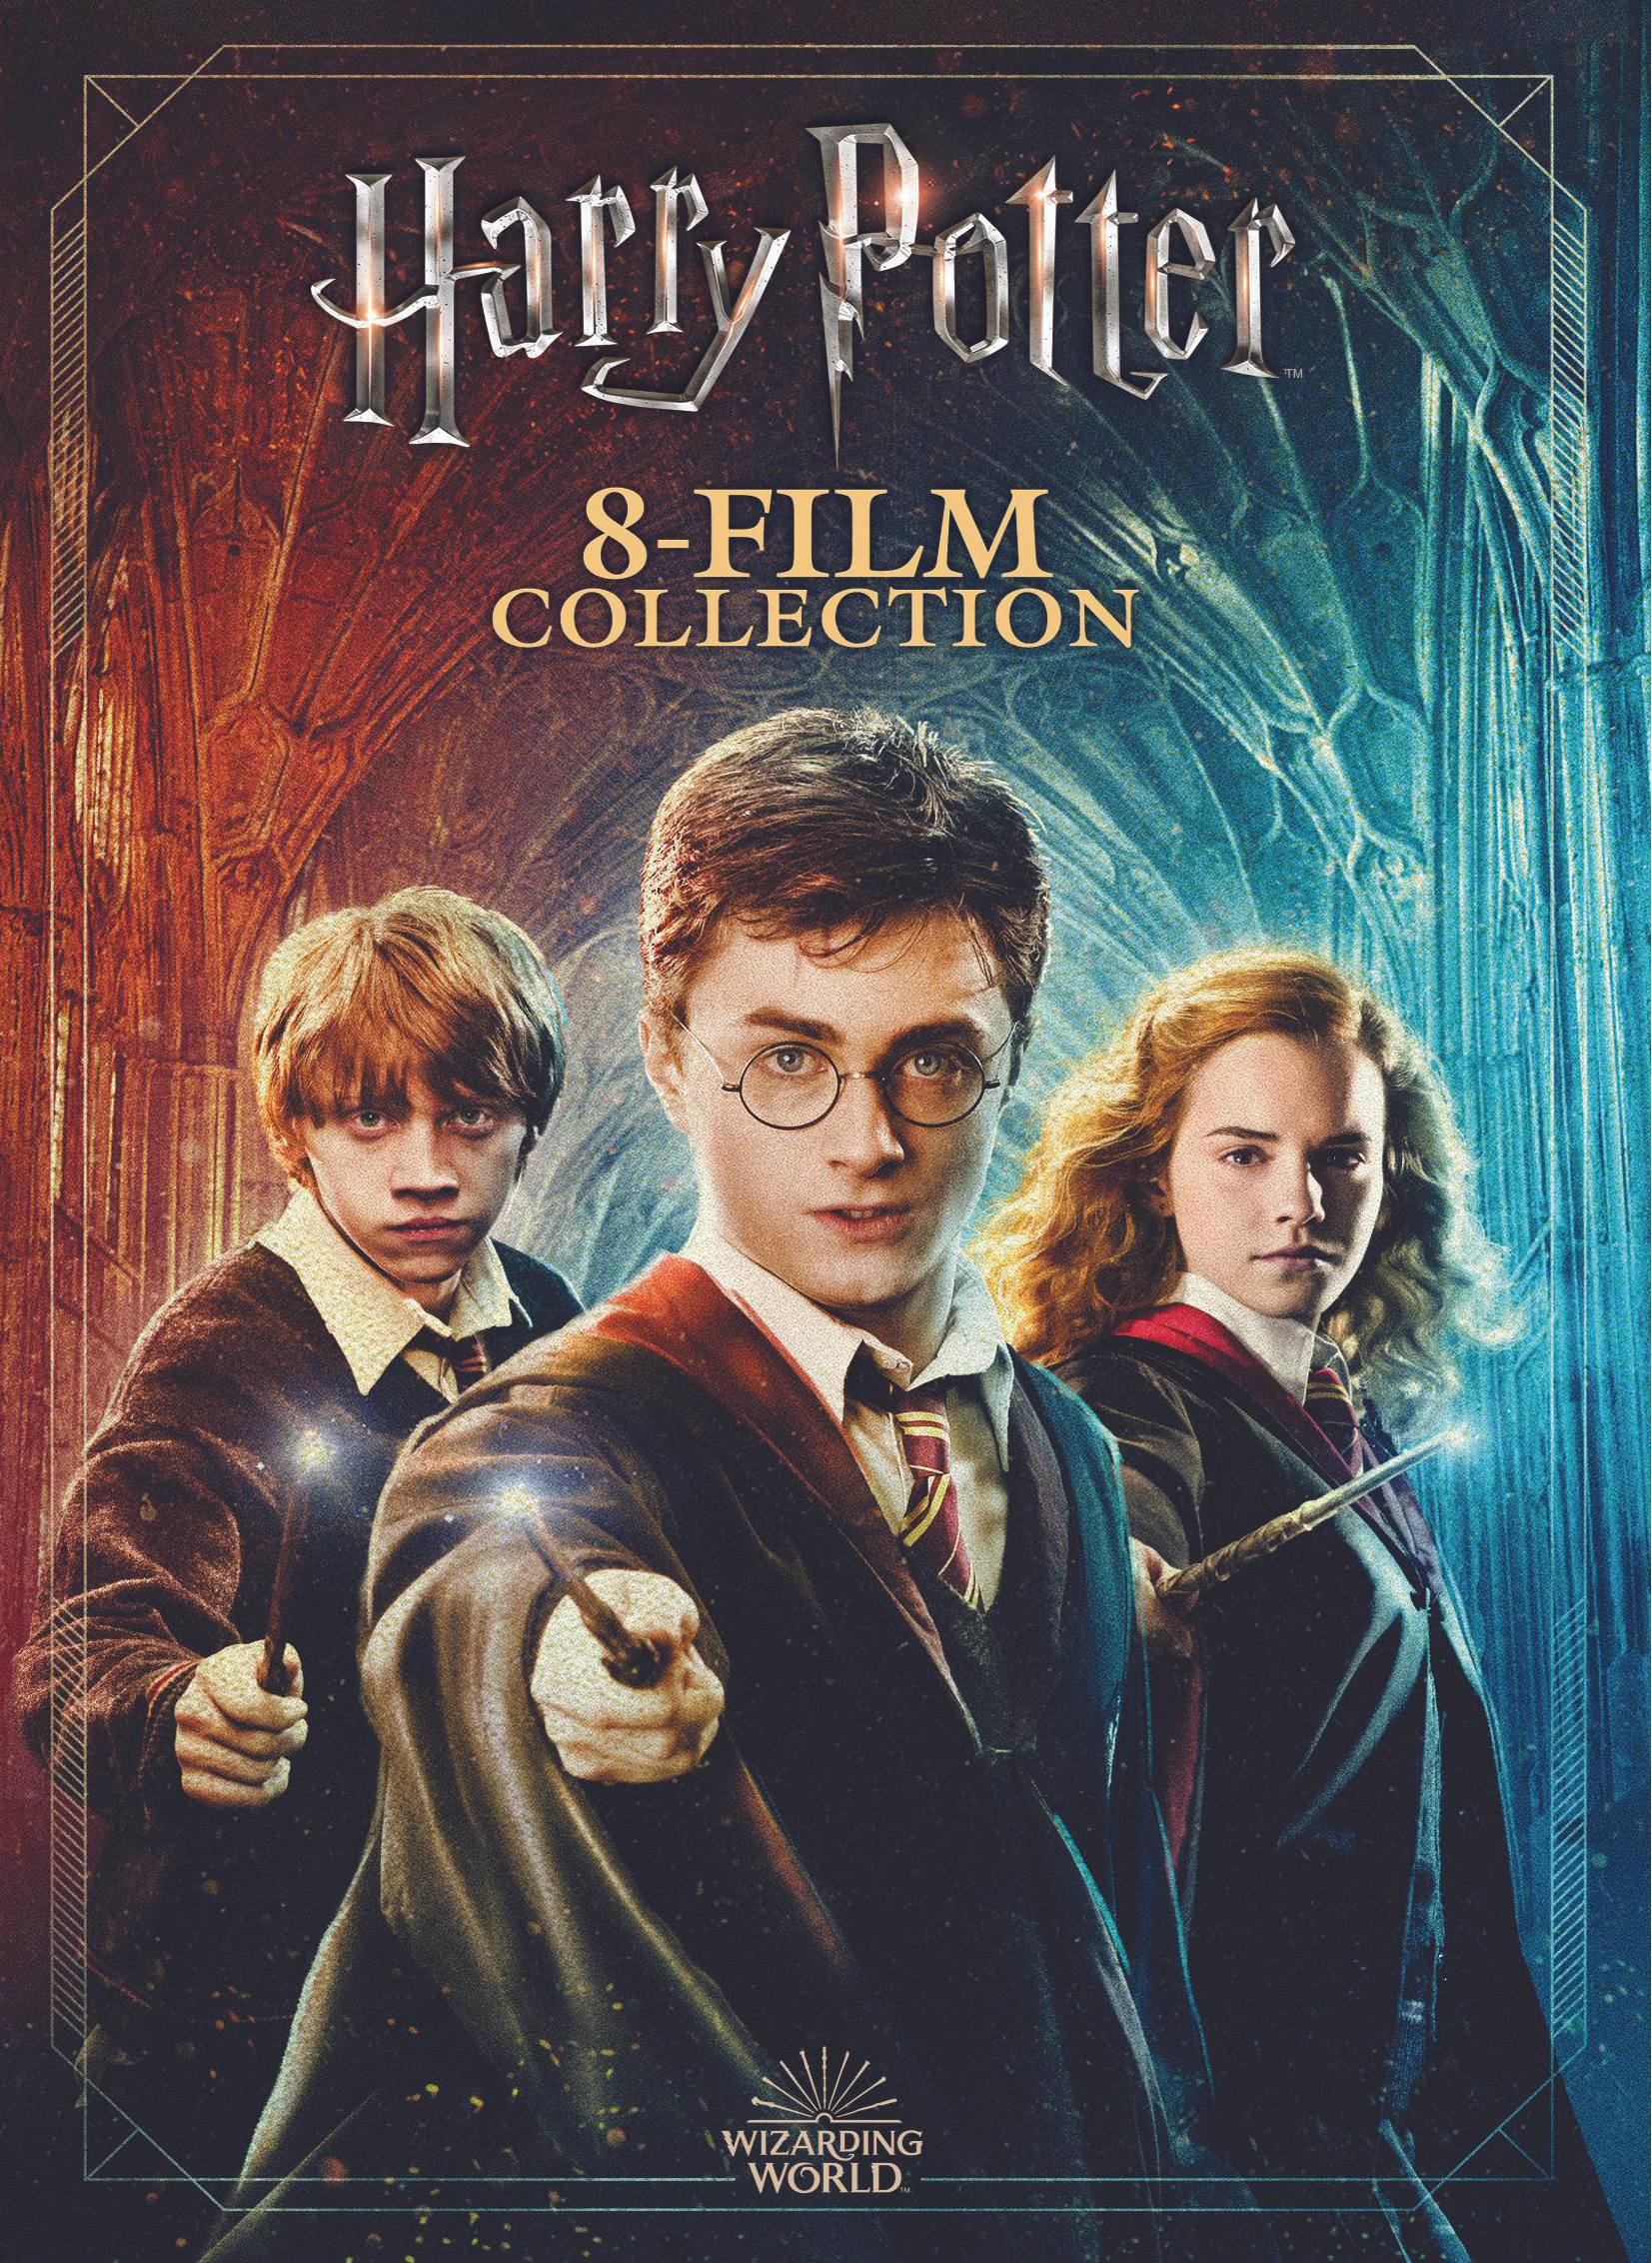 Harry Potter: The Complete 8-Film Collection on 8 DVDs: New Audio Book (DVD)